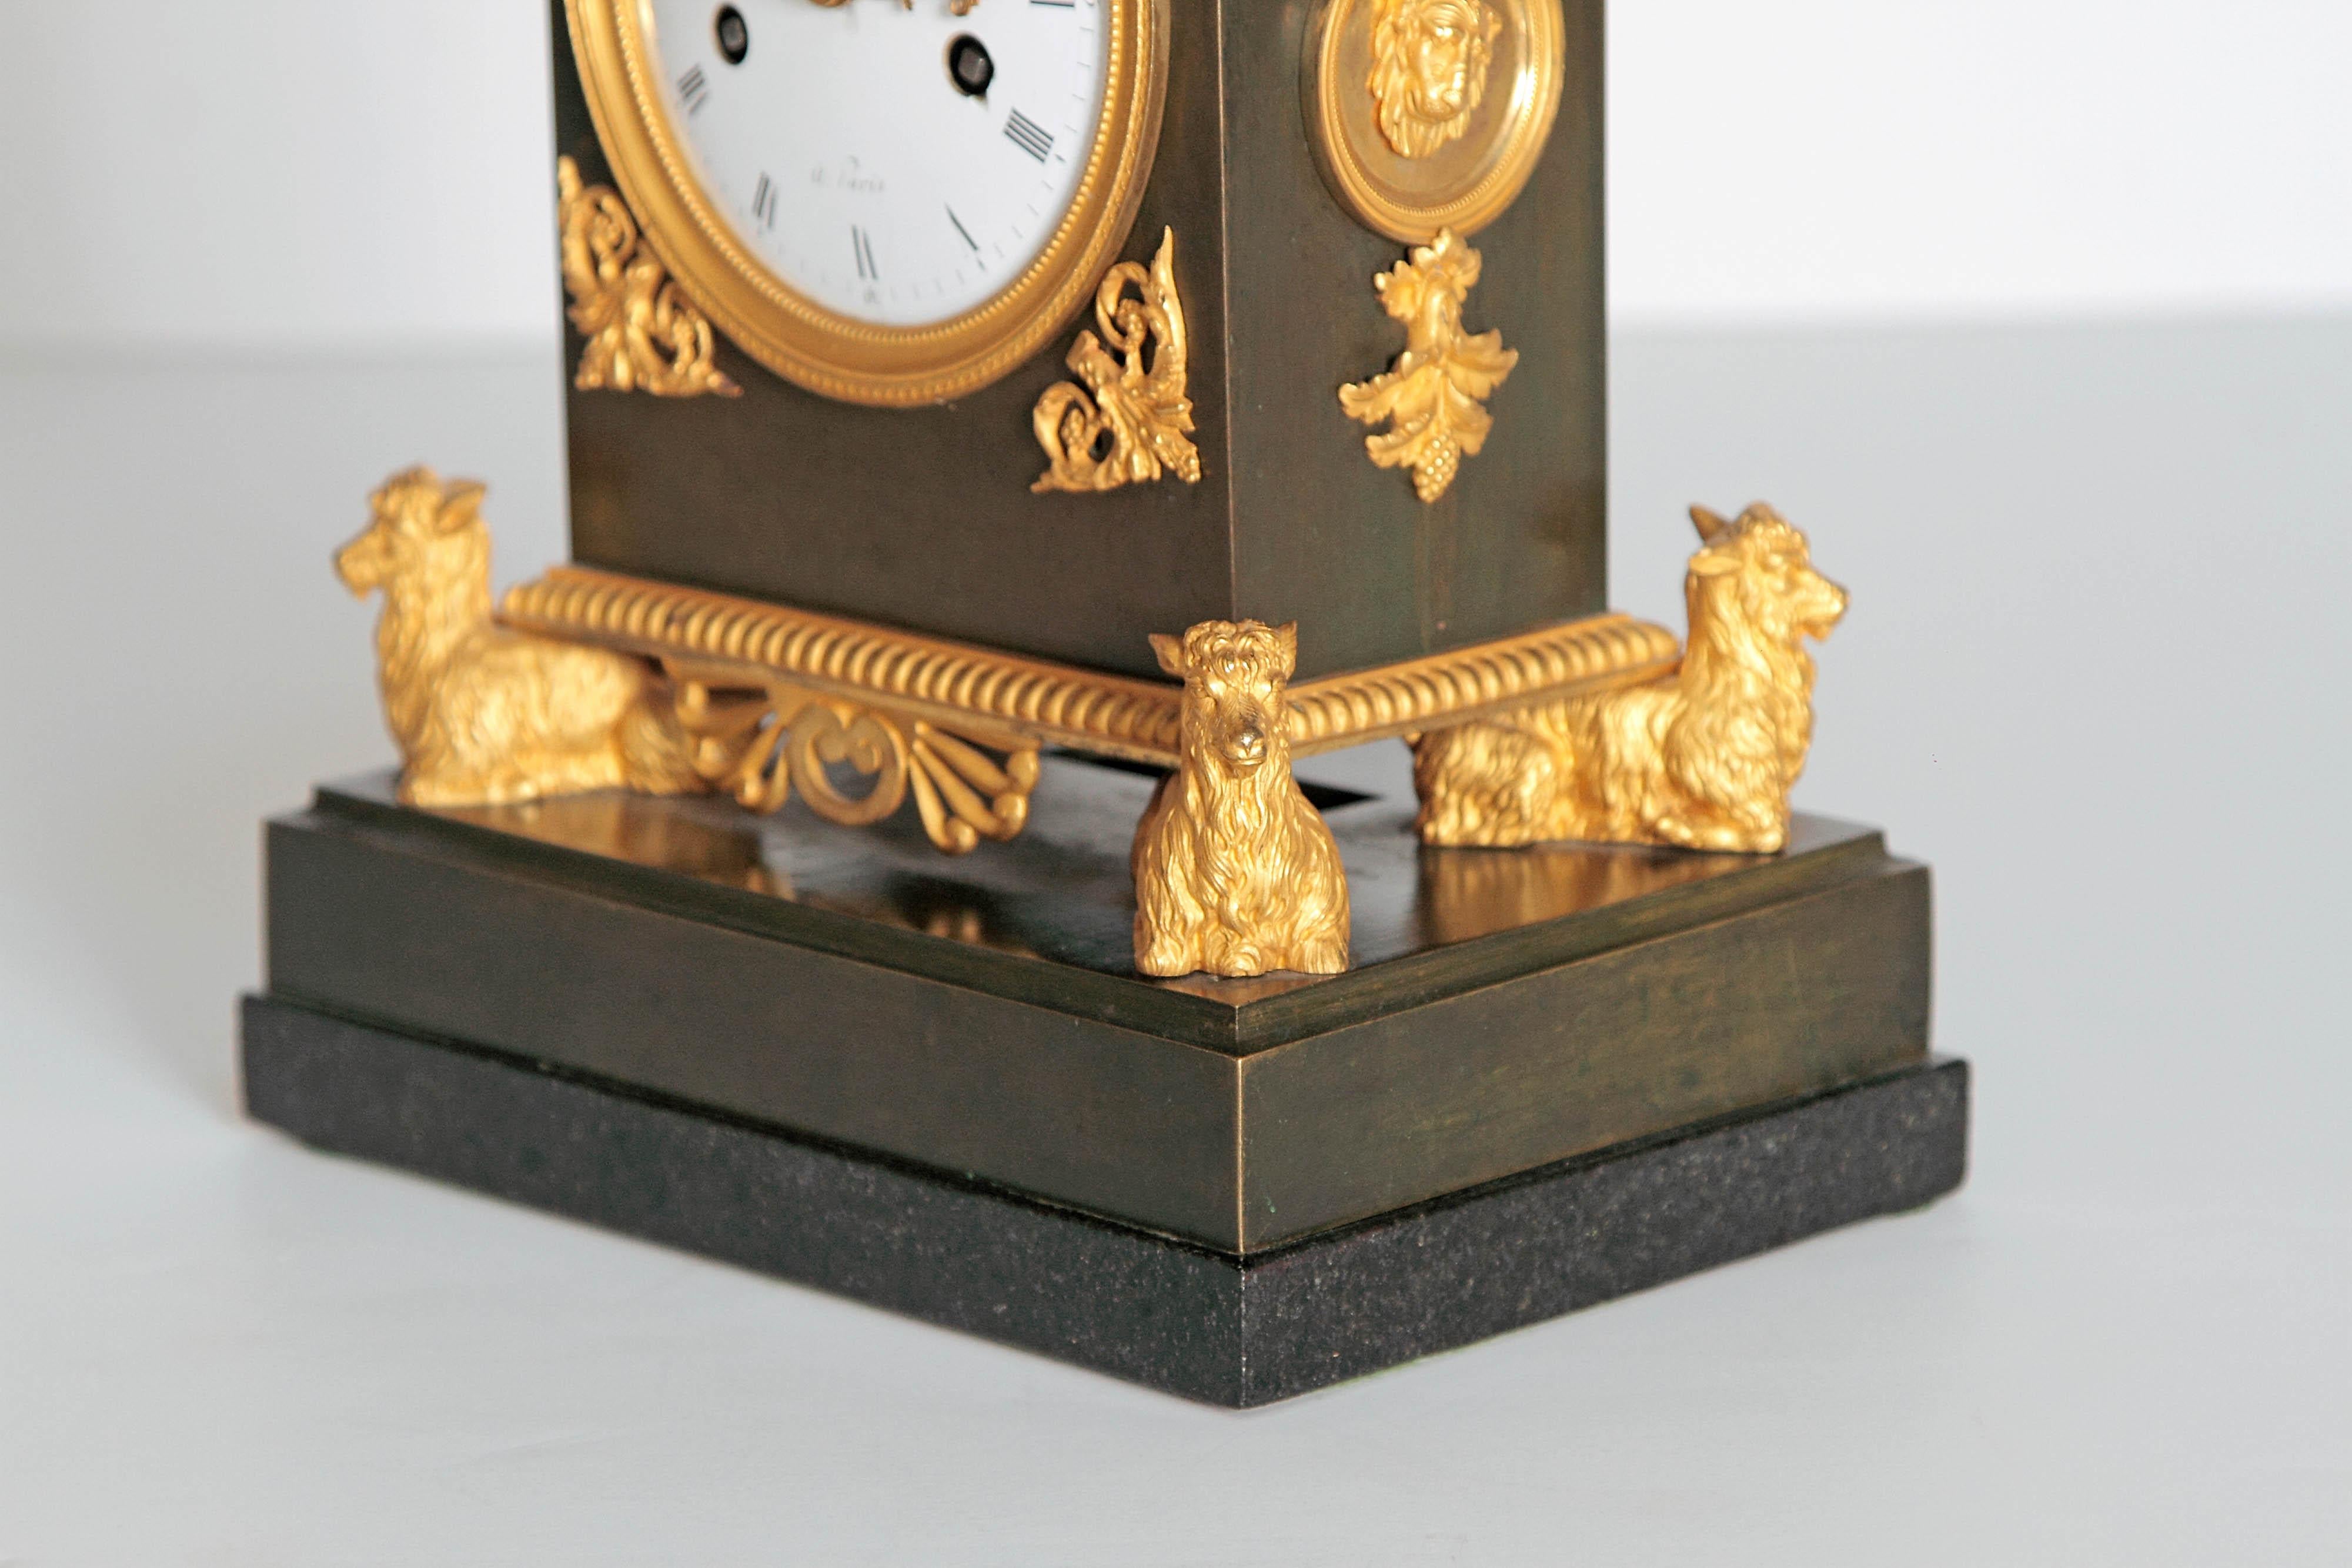 Neoclassical Early 19th Century French Clock with Putto